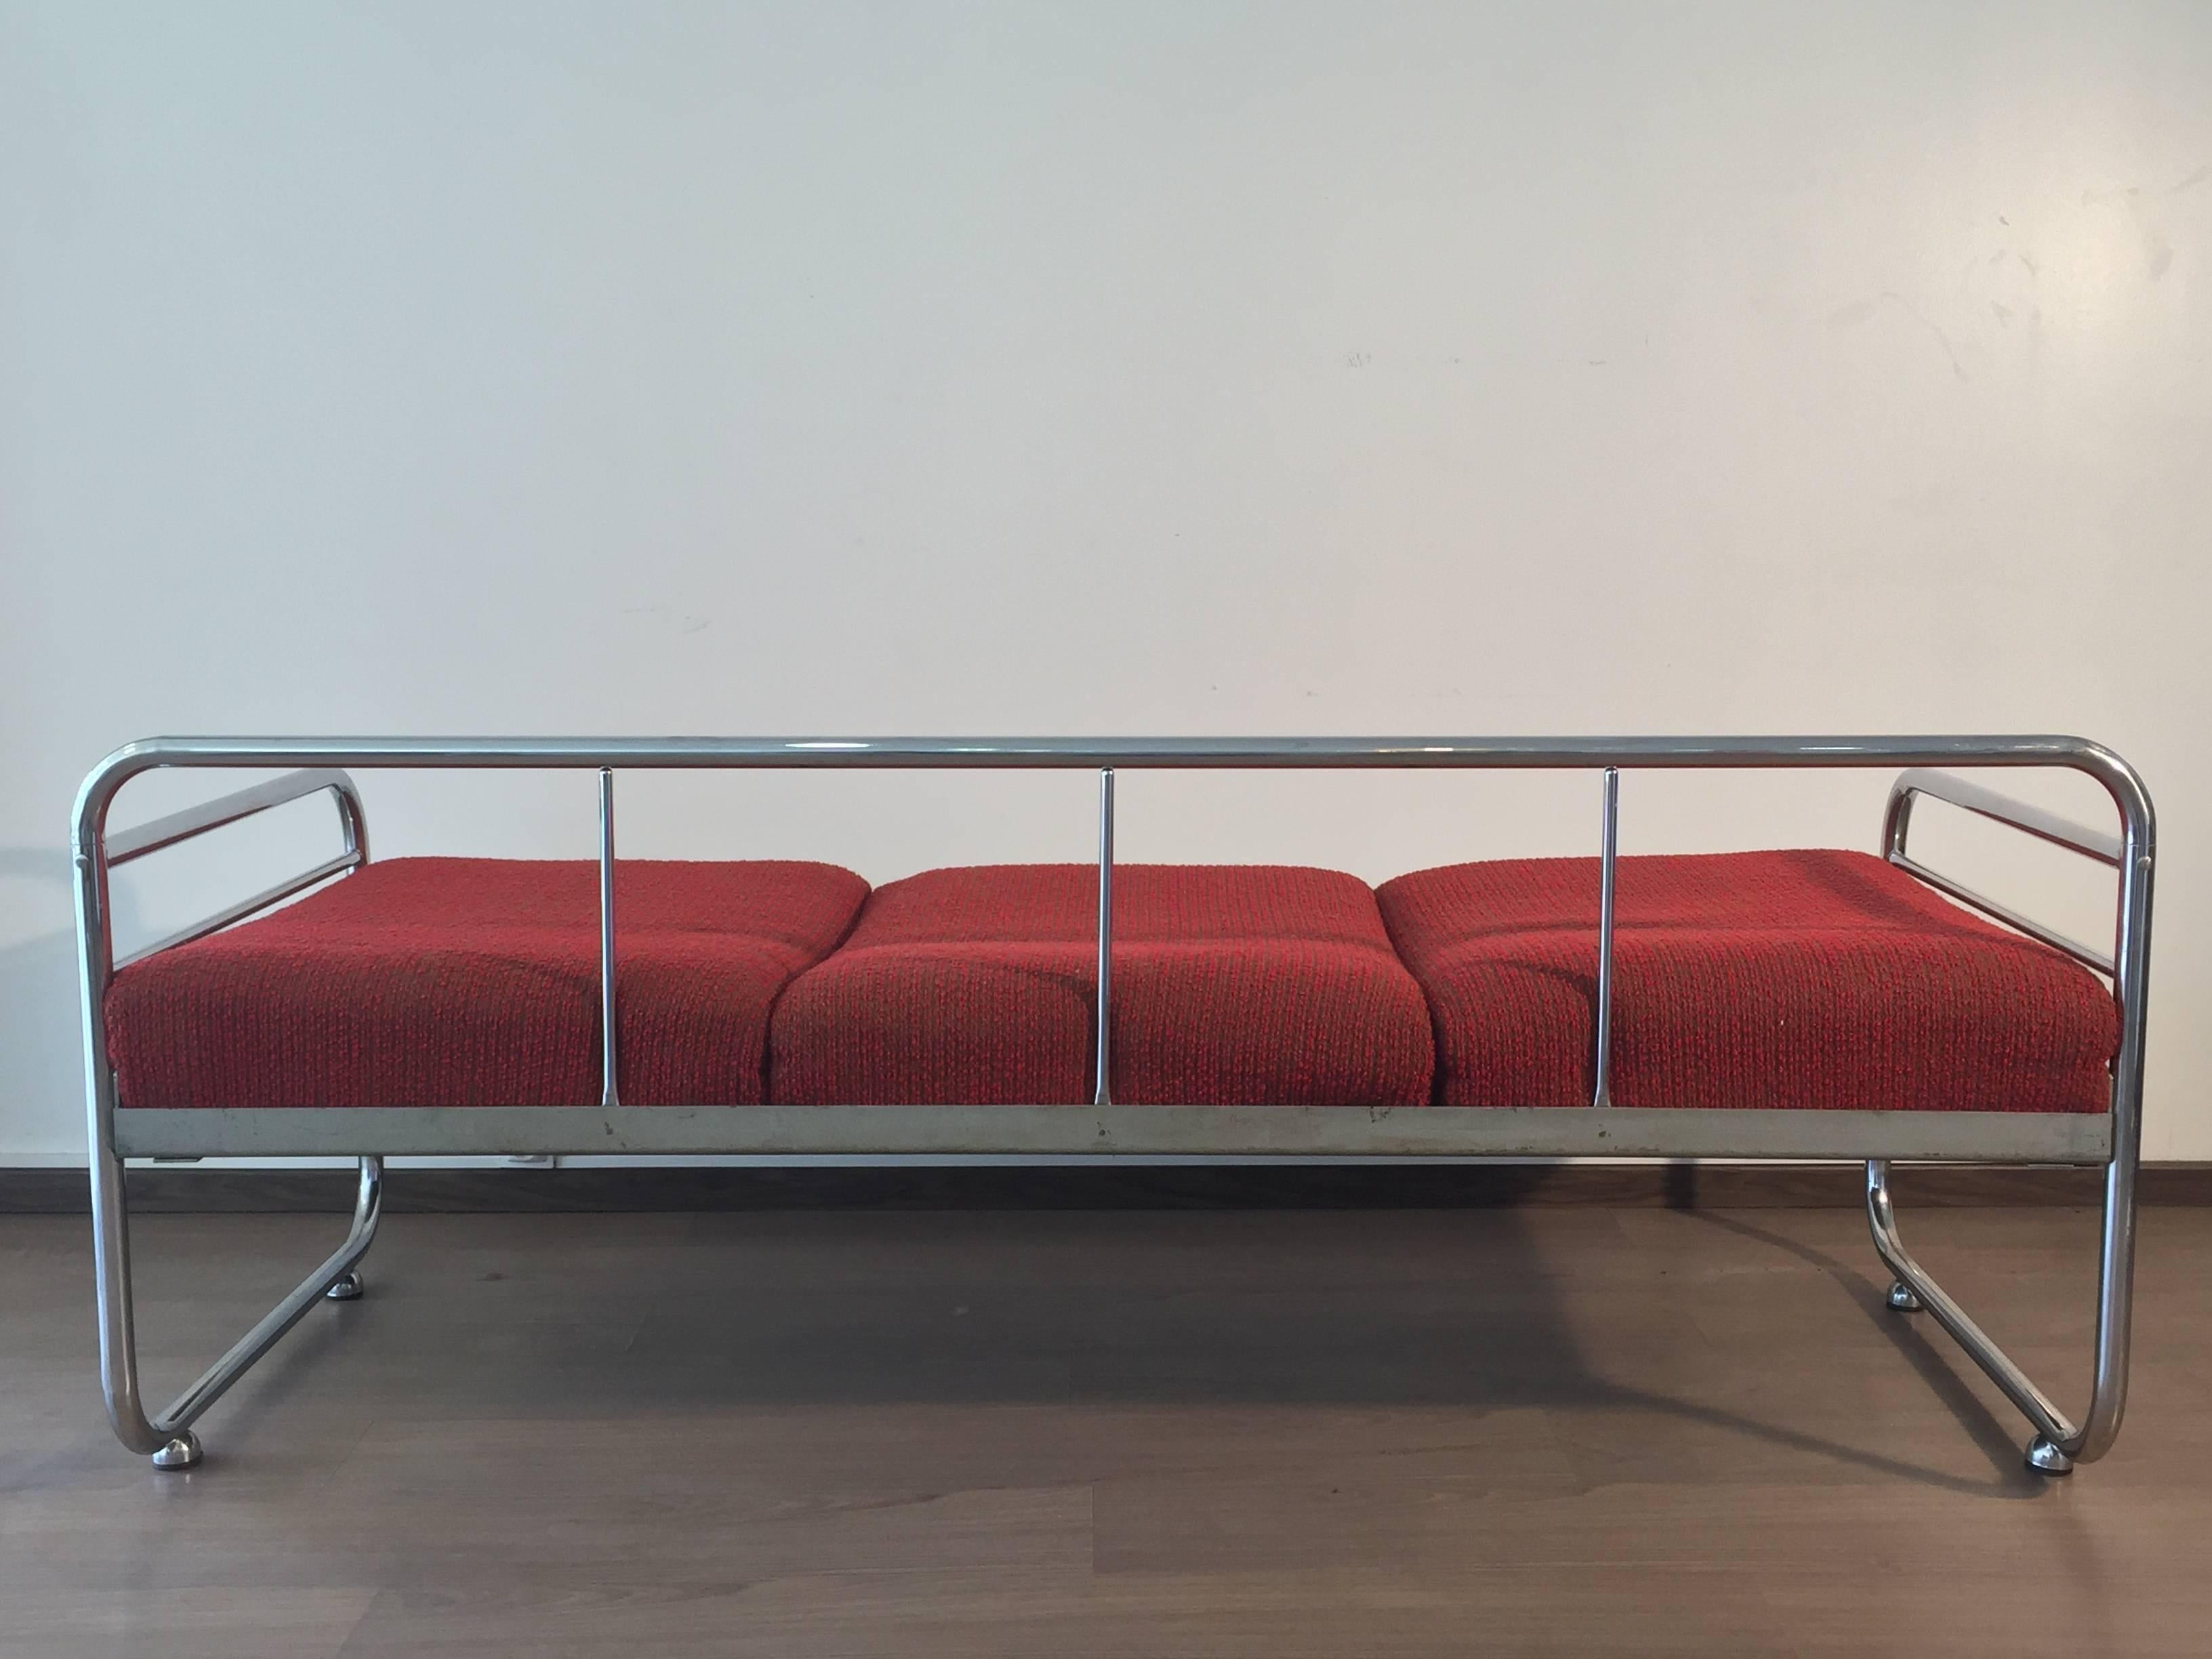 This modernist sofa or daybed was designed and built, circa 1935 by Robert Slezak, based in Moravia. The structure is made of tubular steel with a metal base with two cushions. The chrome is in very good condition.
You can find two assorted